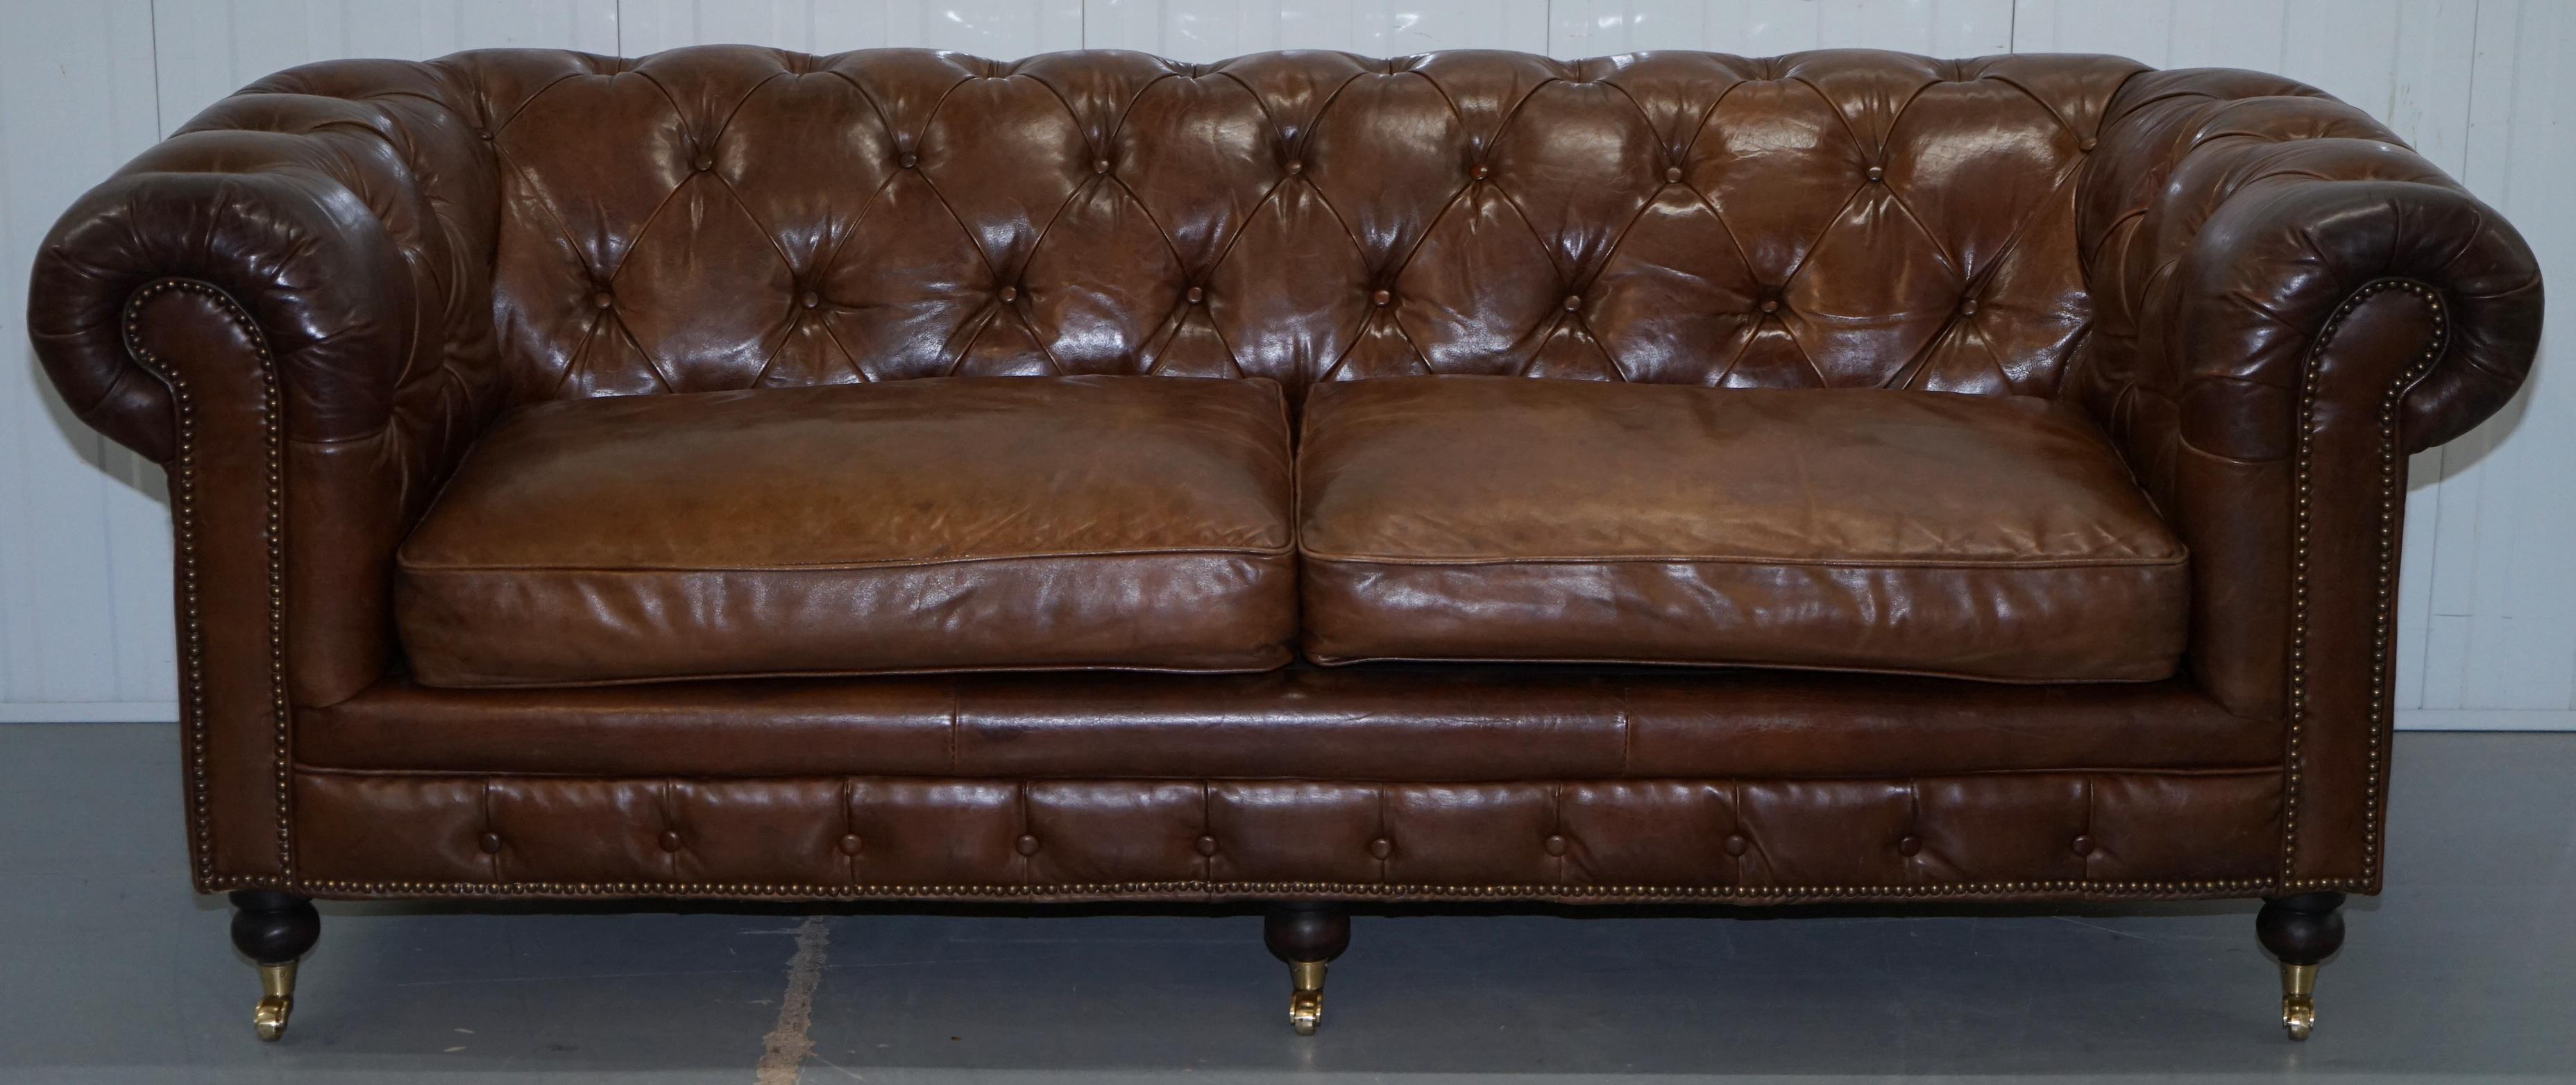 We are delighted to offer for sale this very nice Timothy Oulton Westminster aged brown leather Chesterfield sofa RRP £4425

We have cleaned waxed and polished it from top to bottom, there might be the odd little mark from transport but mostly it